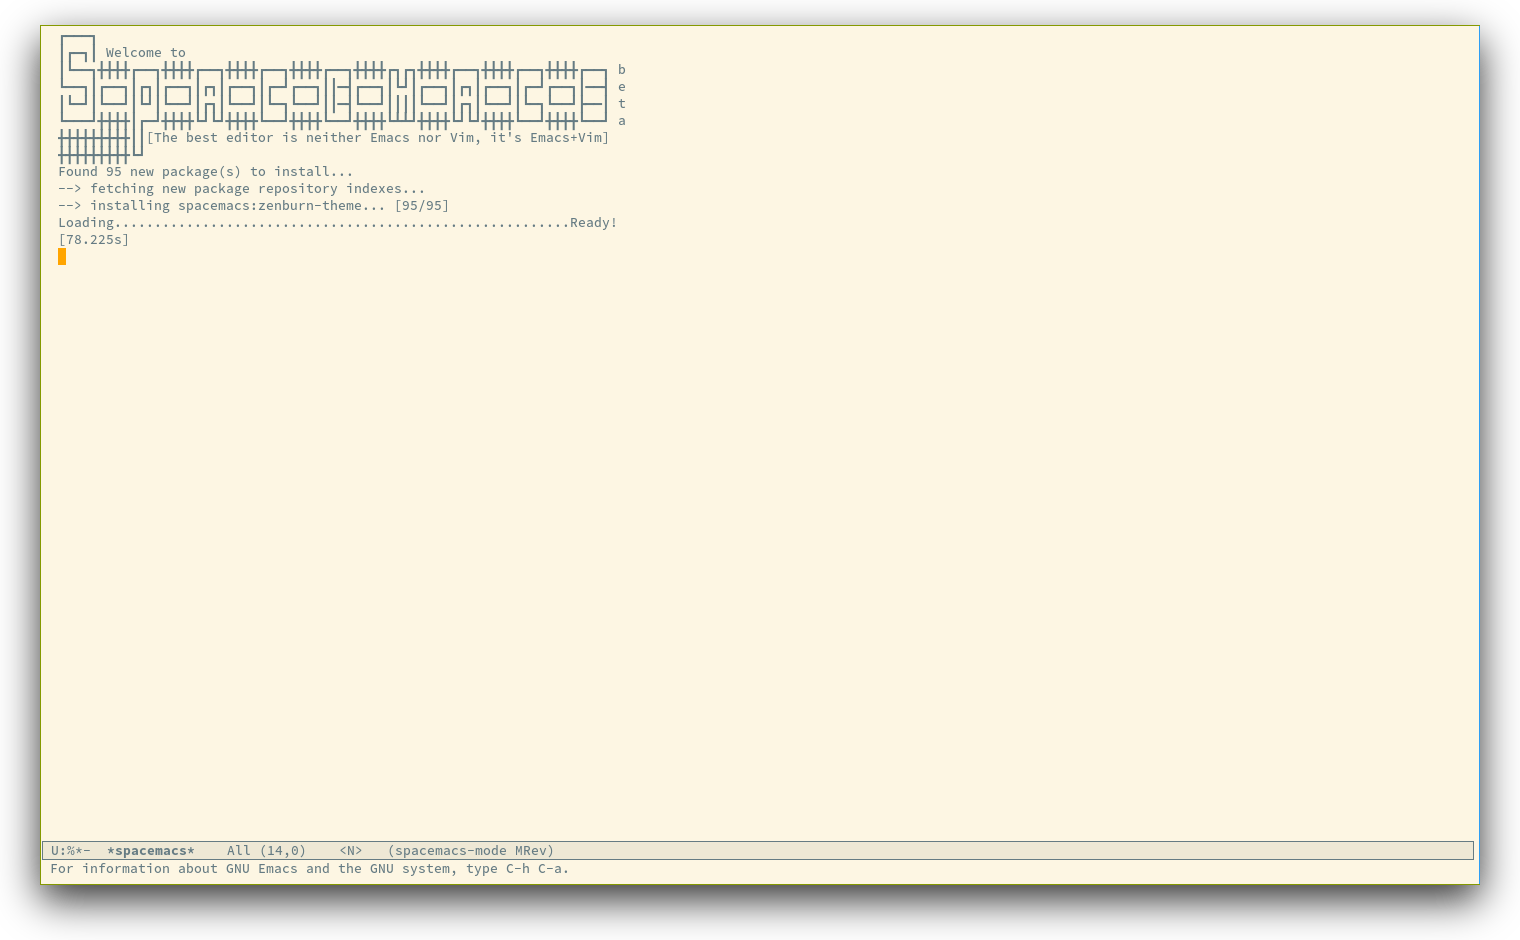 /TakeV/spacemacs/media/commit/7c160e8ae5f298a730f0b7c9730be06d55a6dec2/doc/img/spacemacs-startup.png